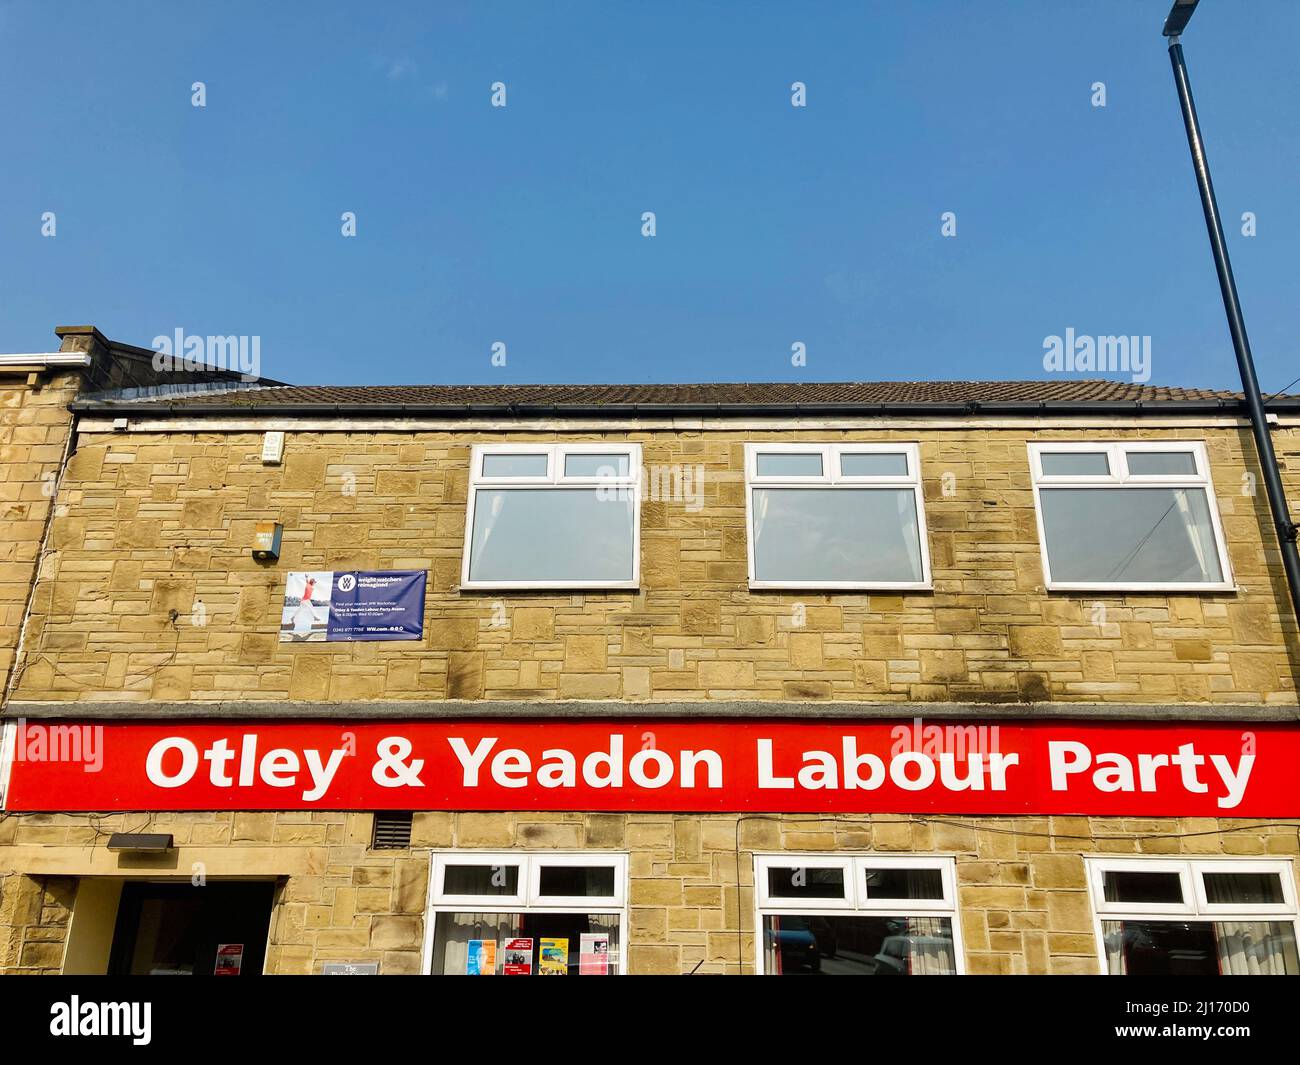 Otley and Yeadon Labour Party, a local grassroots branch of the Labour Party a political organisation in the UK. Stock Photo